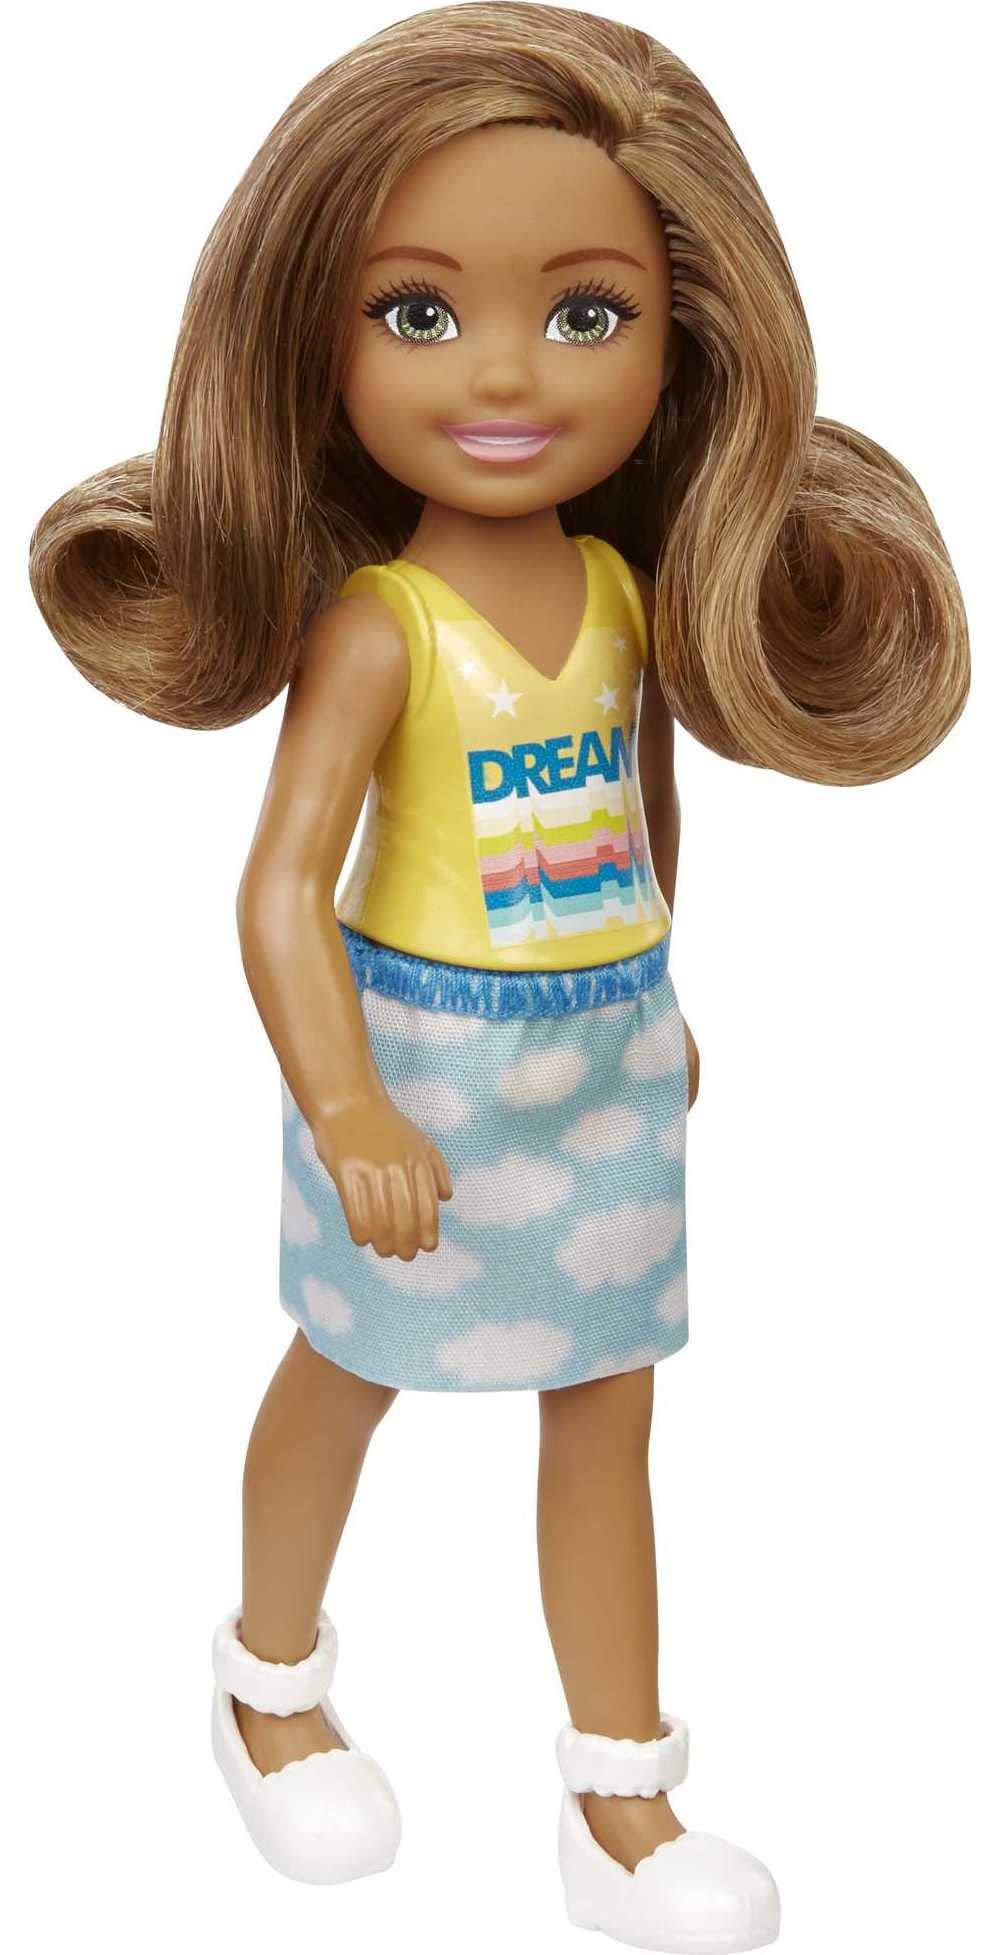 Barbie Chelsea Doll (6-inch Brunette) Wearing Skirt with Cloud Print and White Shoes, Gift for 3 to 7 Year Olds